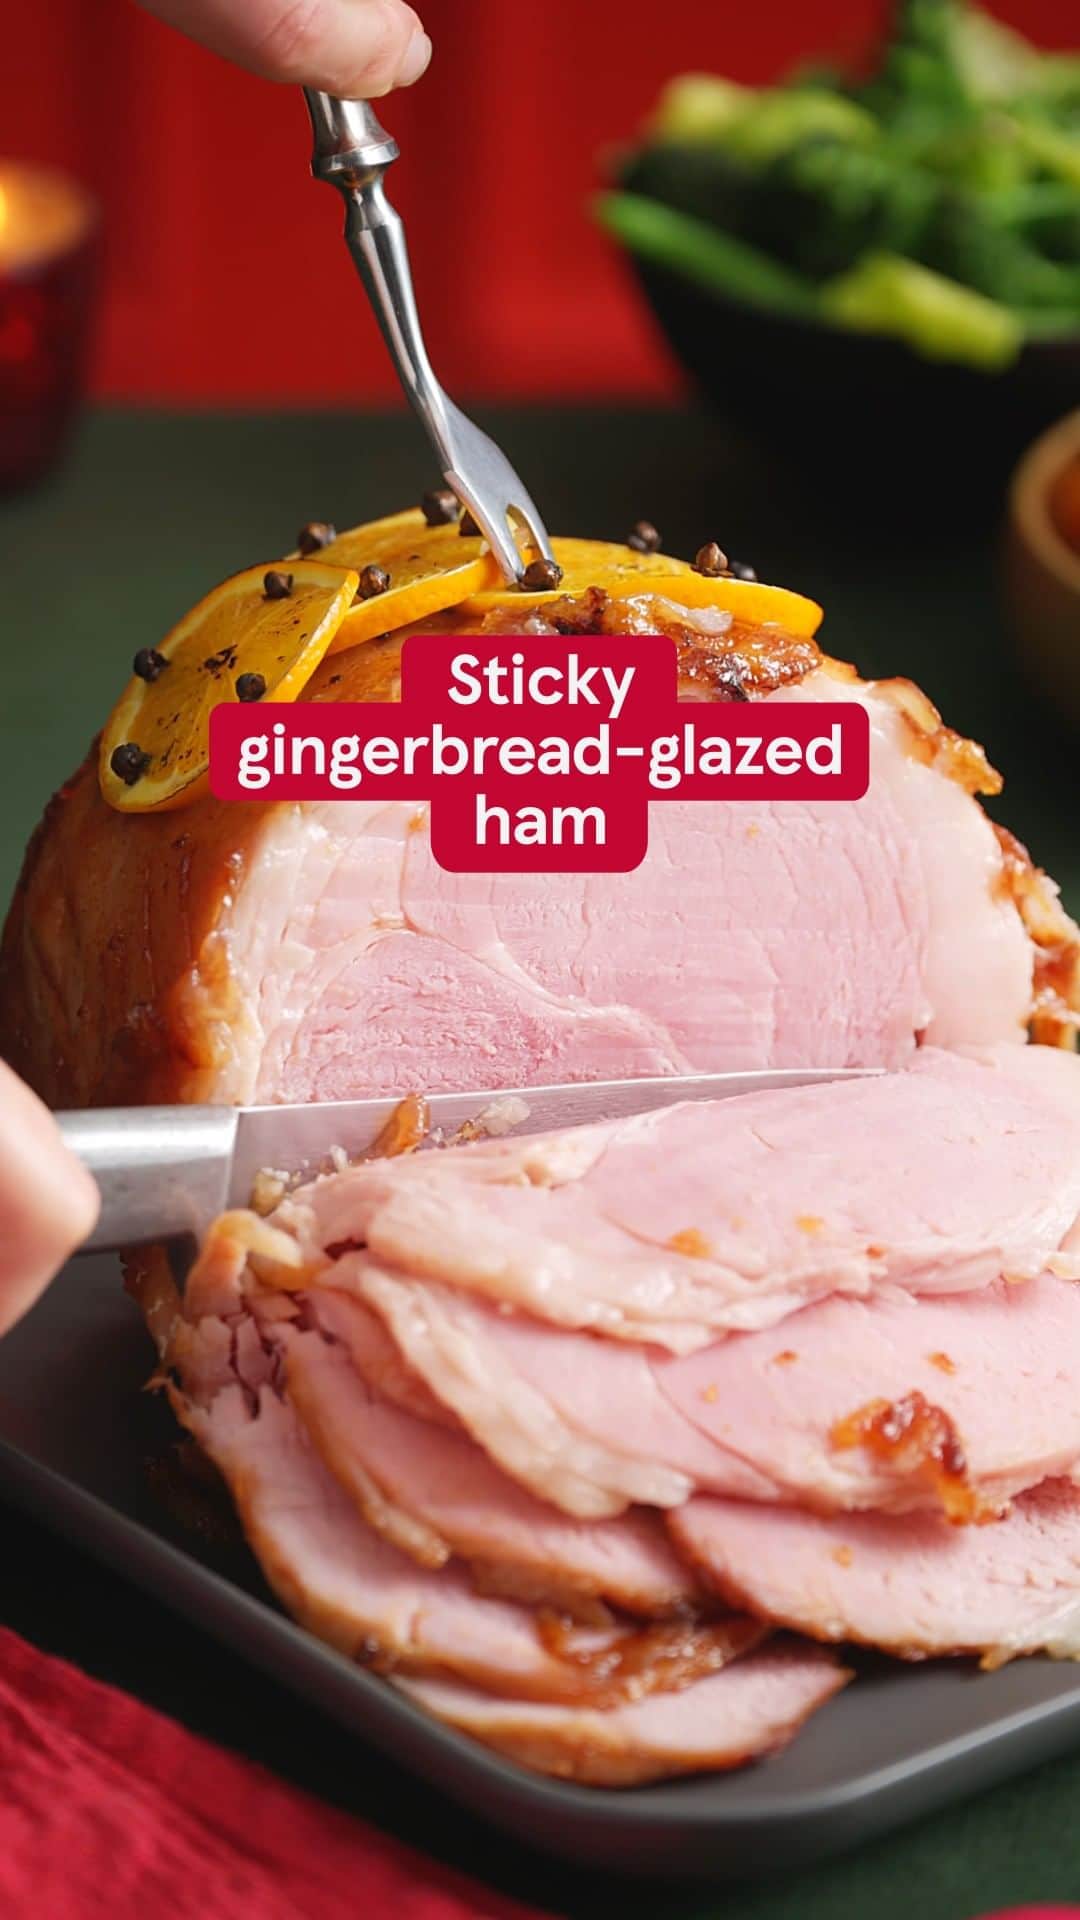 Tesco Food Officialのインスタグラム：「If you want to truly #BecomeMoreChristmas, you have to try this sticky gingerbread-glazed ham 🍖 The sweet and savoury festive fusion makes for the ultimate centerpiece 🎄 Get the recipe by heading to the link in bio.」